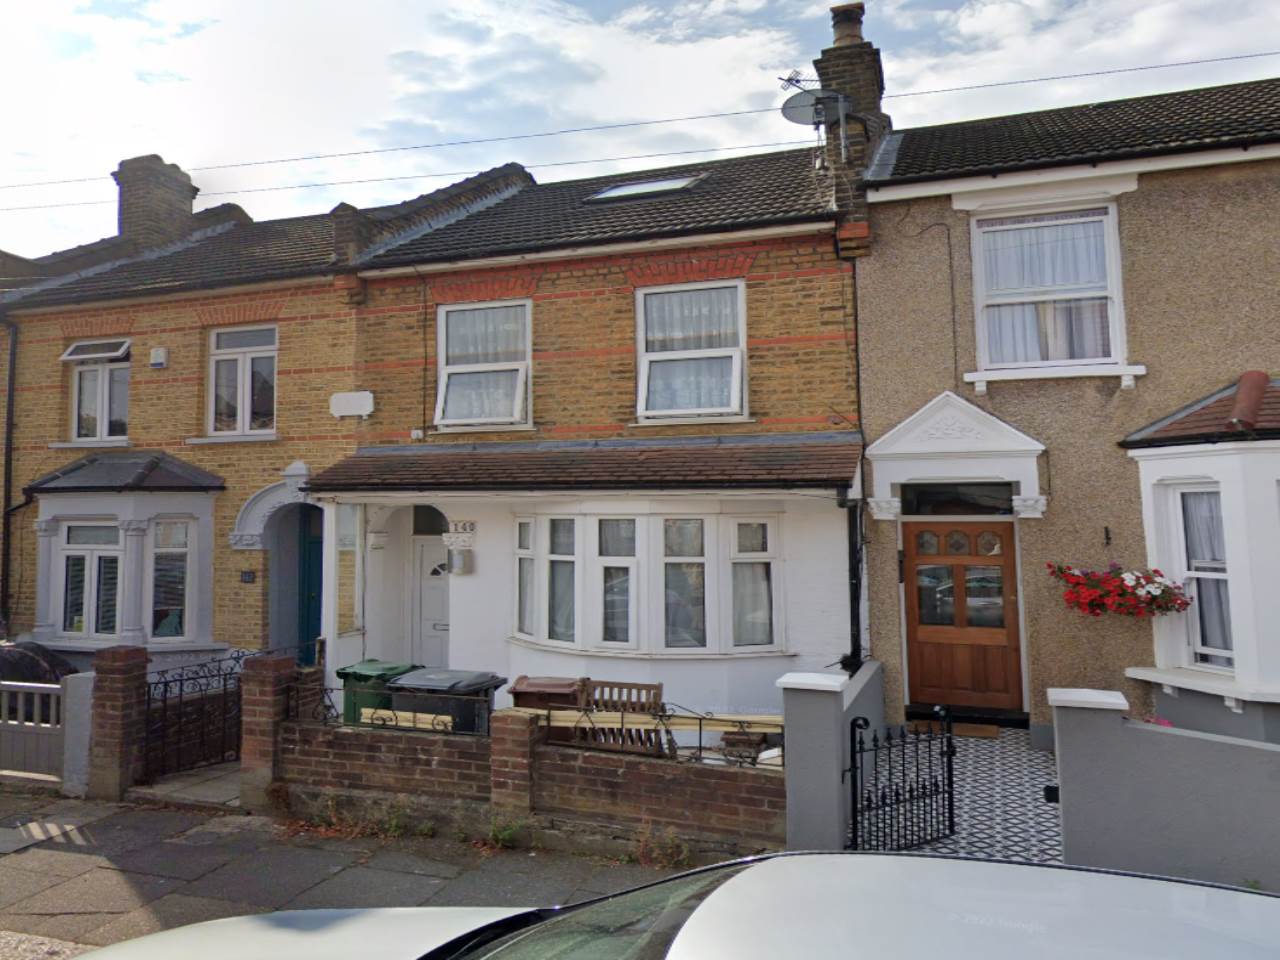 6 bed house to rent in Bramley Close, Walthamstow, E17 